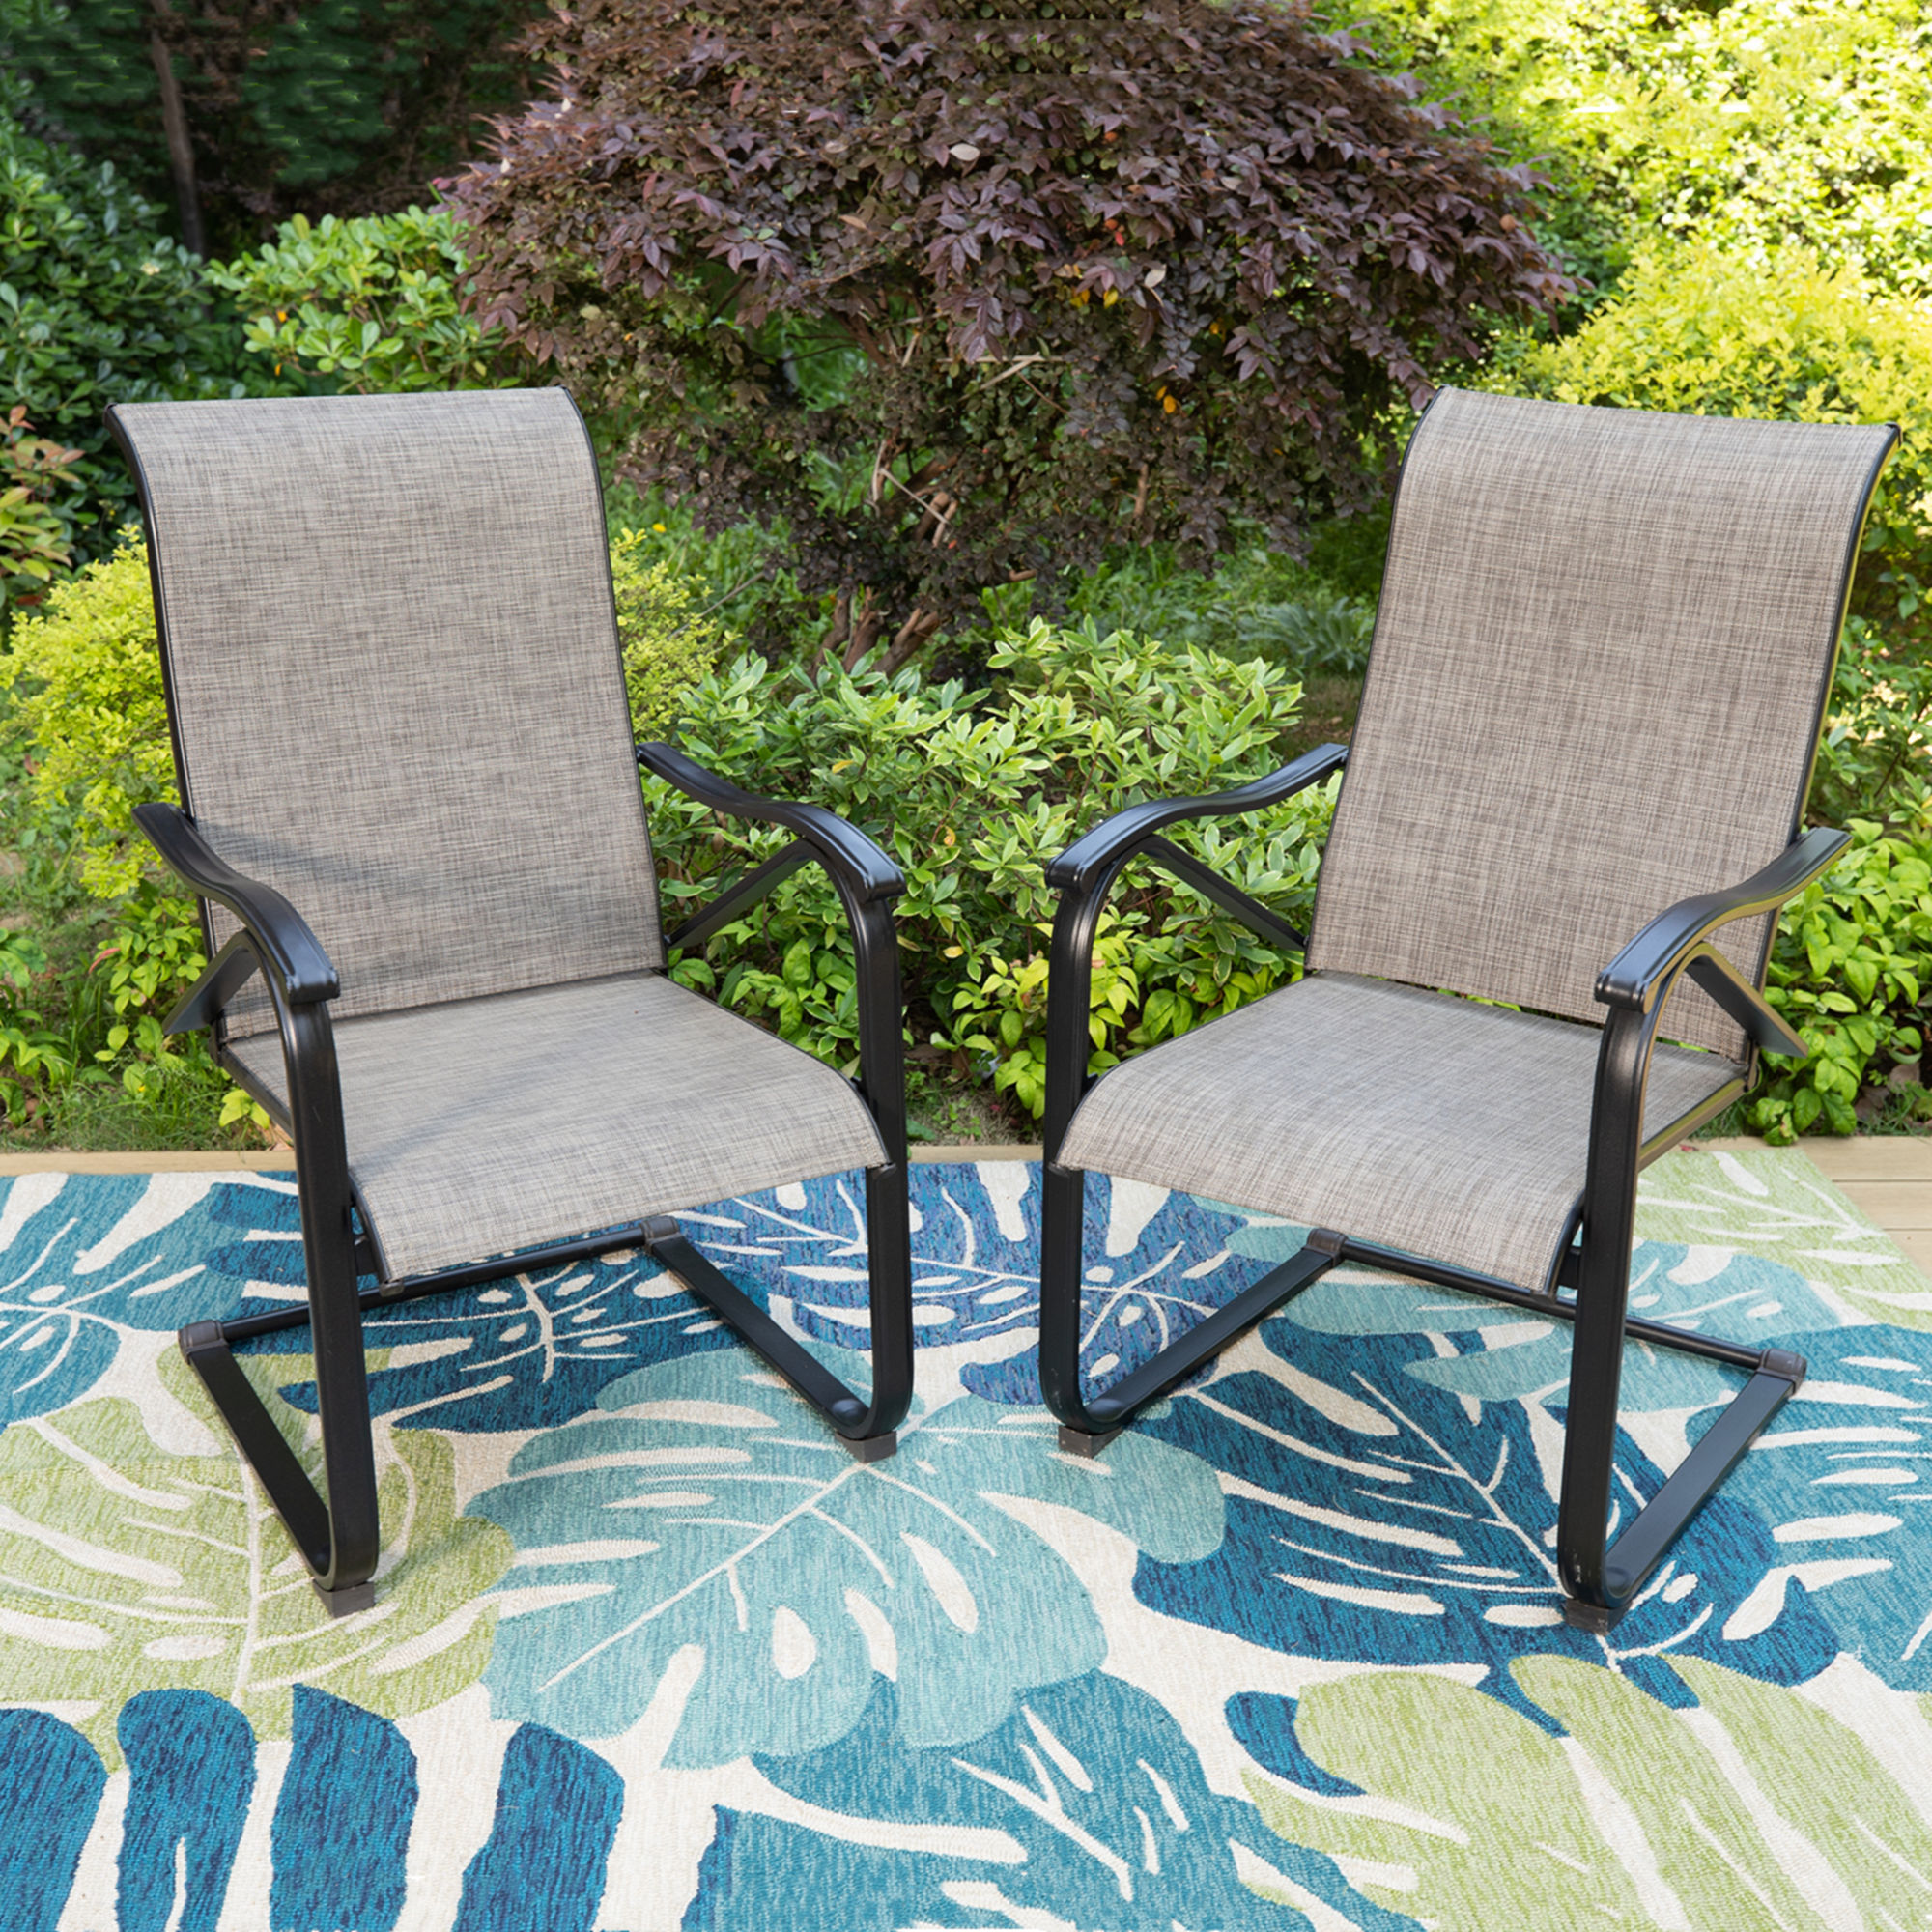 MF Studio 2-Piece Outdoor Patio C-spring Dining Chairs,Metal Rocking Frame with Textilene Seat,Gray&Black - image 1 of 12